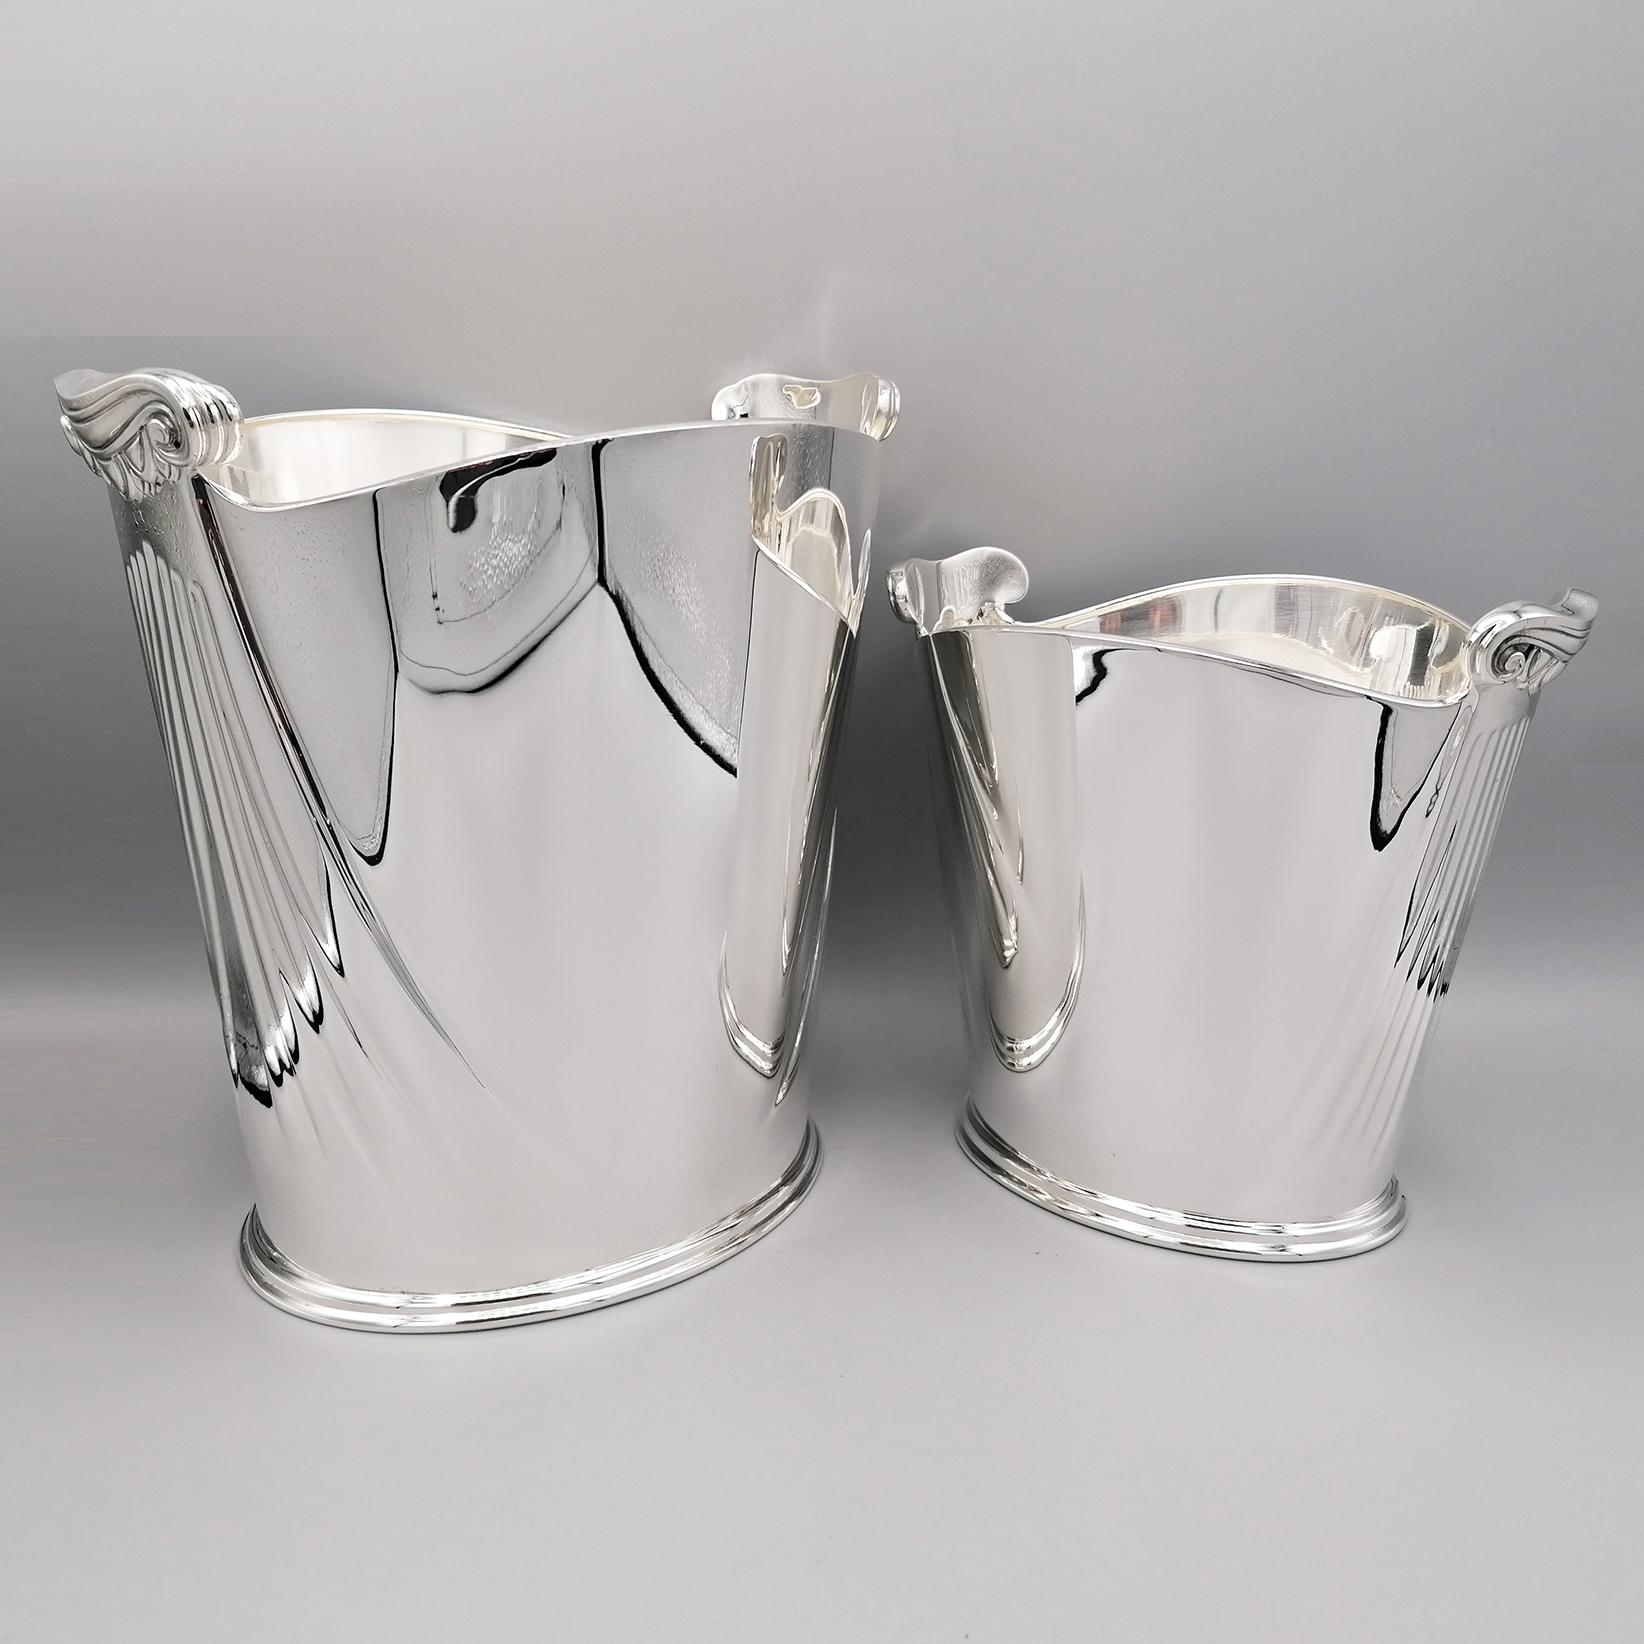 Gourgeous sterling silver champagne and ice bucket.
Buckets of oval shape and made entirely by hand, have been embossed and chiseled with ribs reproducing the grooves of the columns and completed with casting in silver that reproduce the Ionic